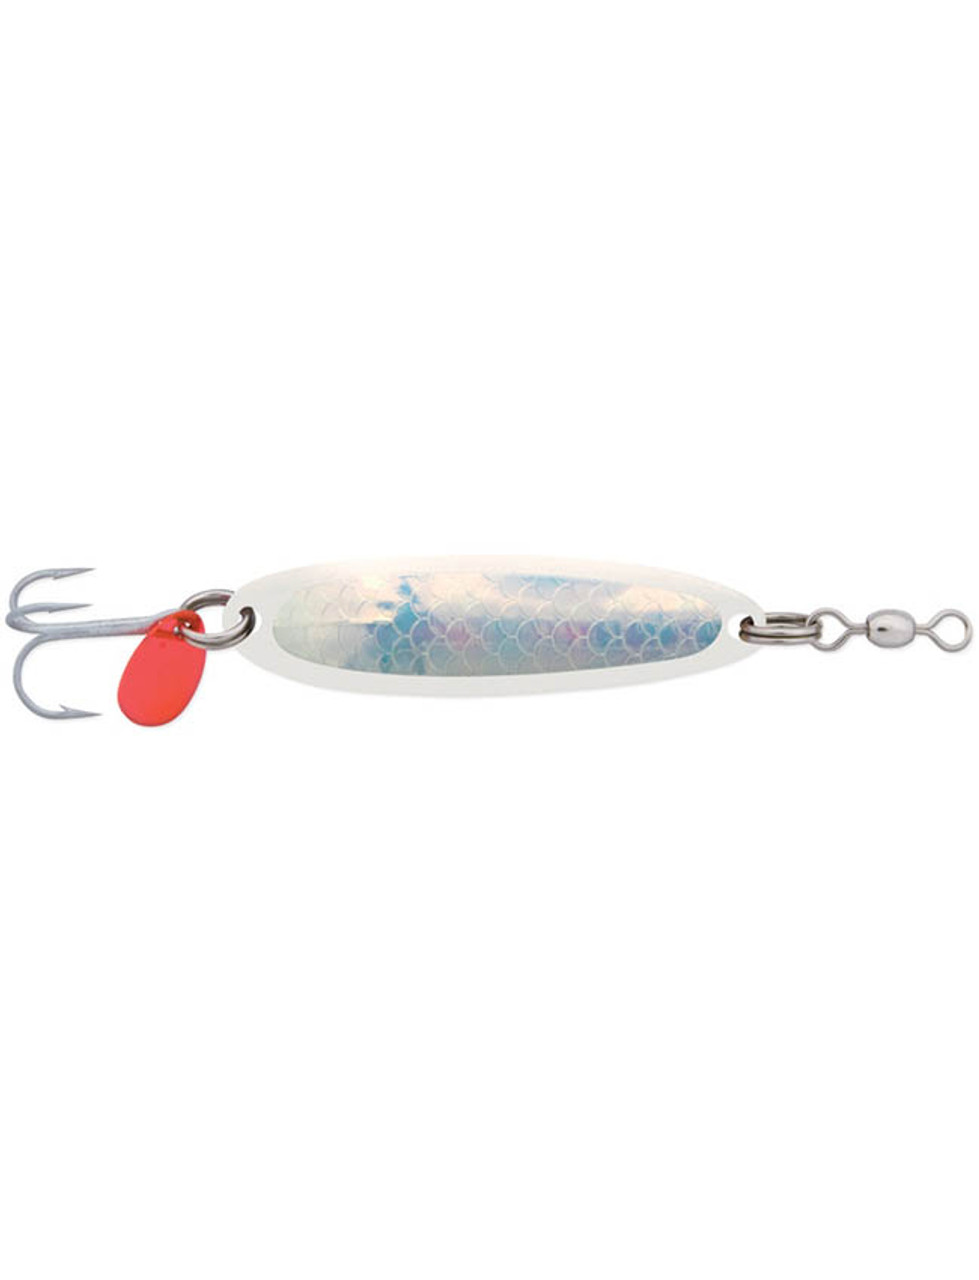 Luhr-Jensen Spoon-Casting Fishing Baits, Lures for sale